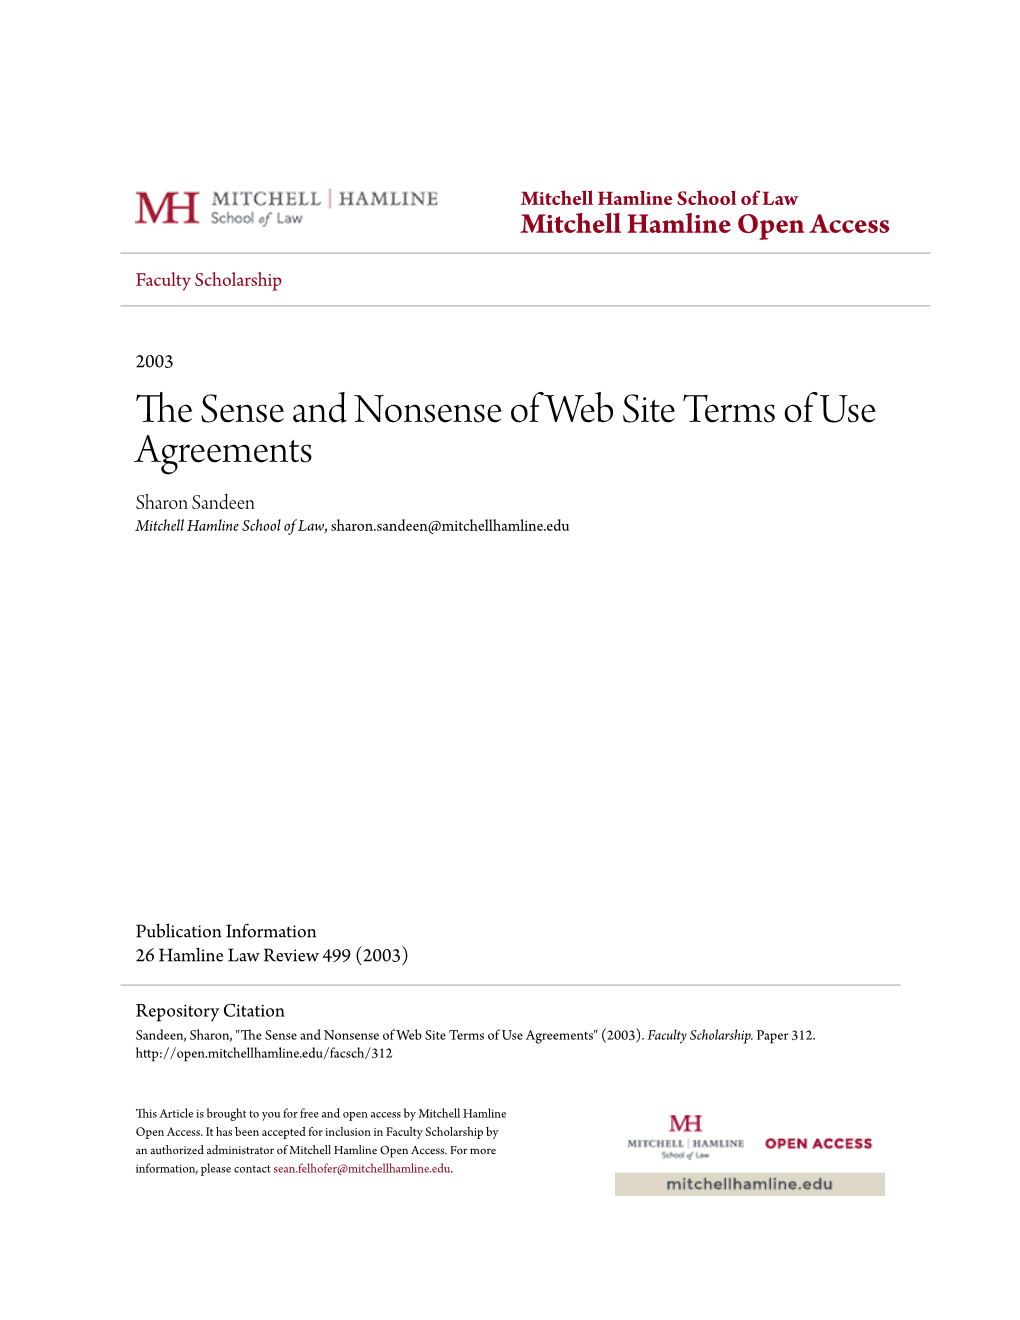 The Sense and Nonsense of Web Site Terms of Use Agreements